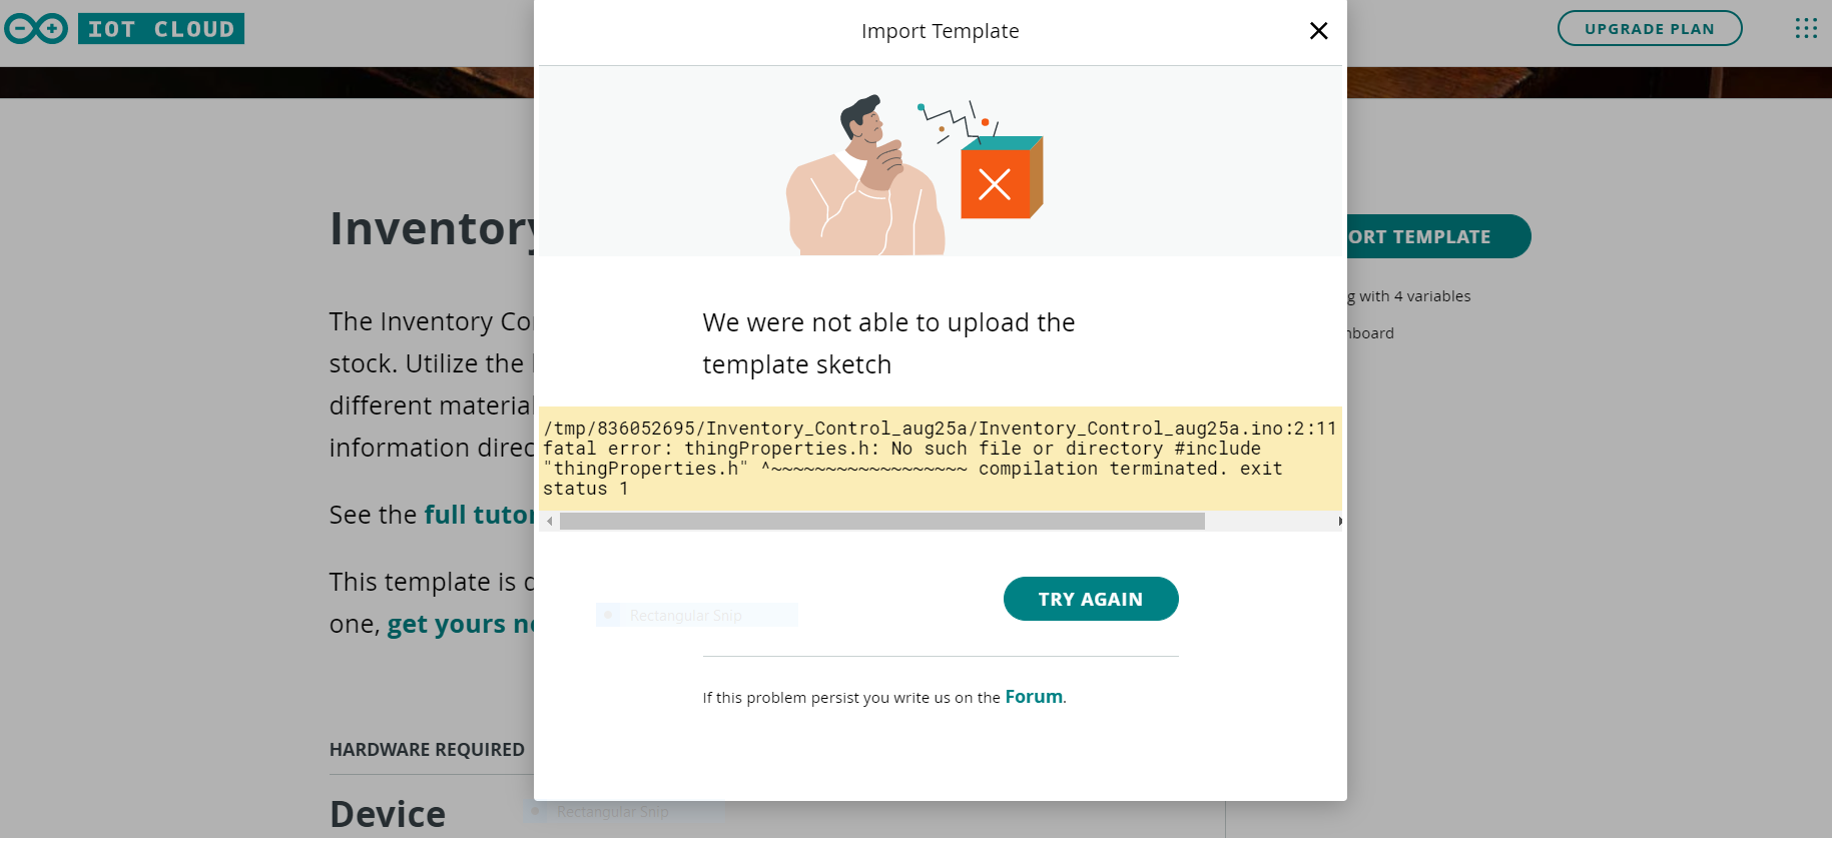 'We were not able to upload the template sketch' error in Arduino Cloud. The file ThingsProperties.h is missing, throwing a 'No such file or directory' error.